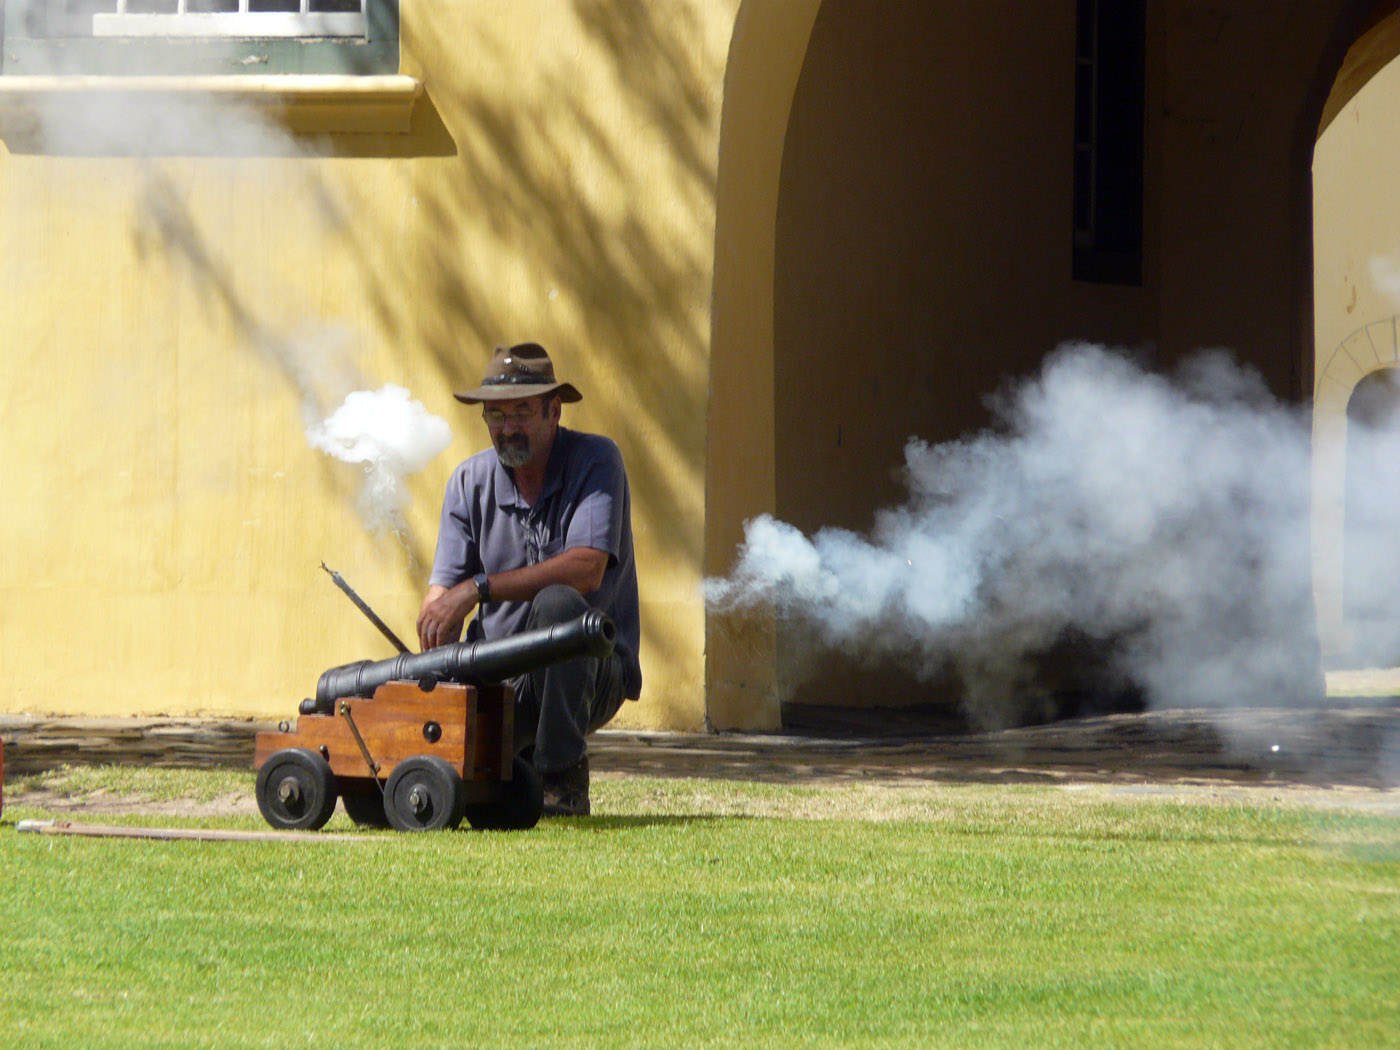 Cannon demonstration at Castle of Good Hope, Cape Town